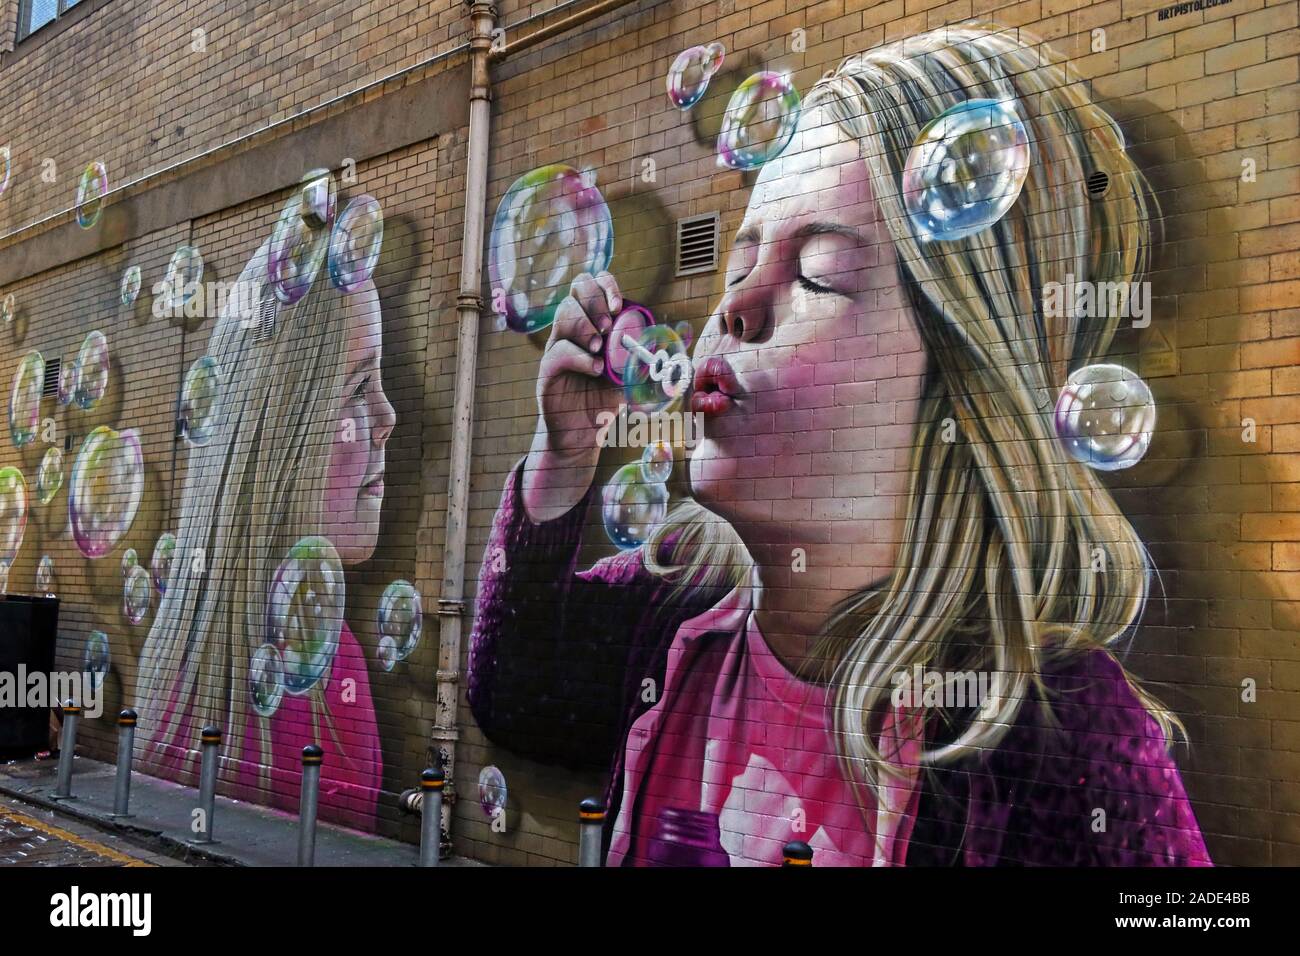 Girl blowing bubbles,painted artwork, by Rogue and Art Pistol 2019, Renfield Lane,Glasgow, Scotland, UK, G2 5AR Stock Photo